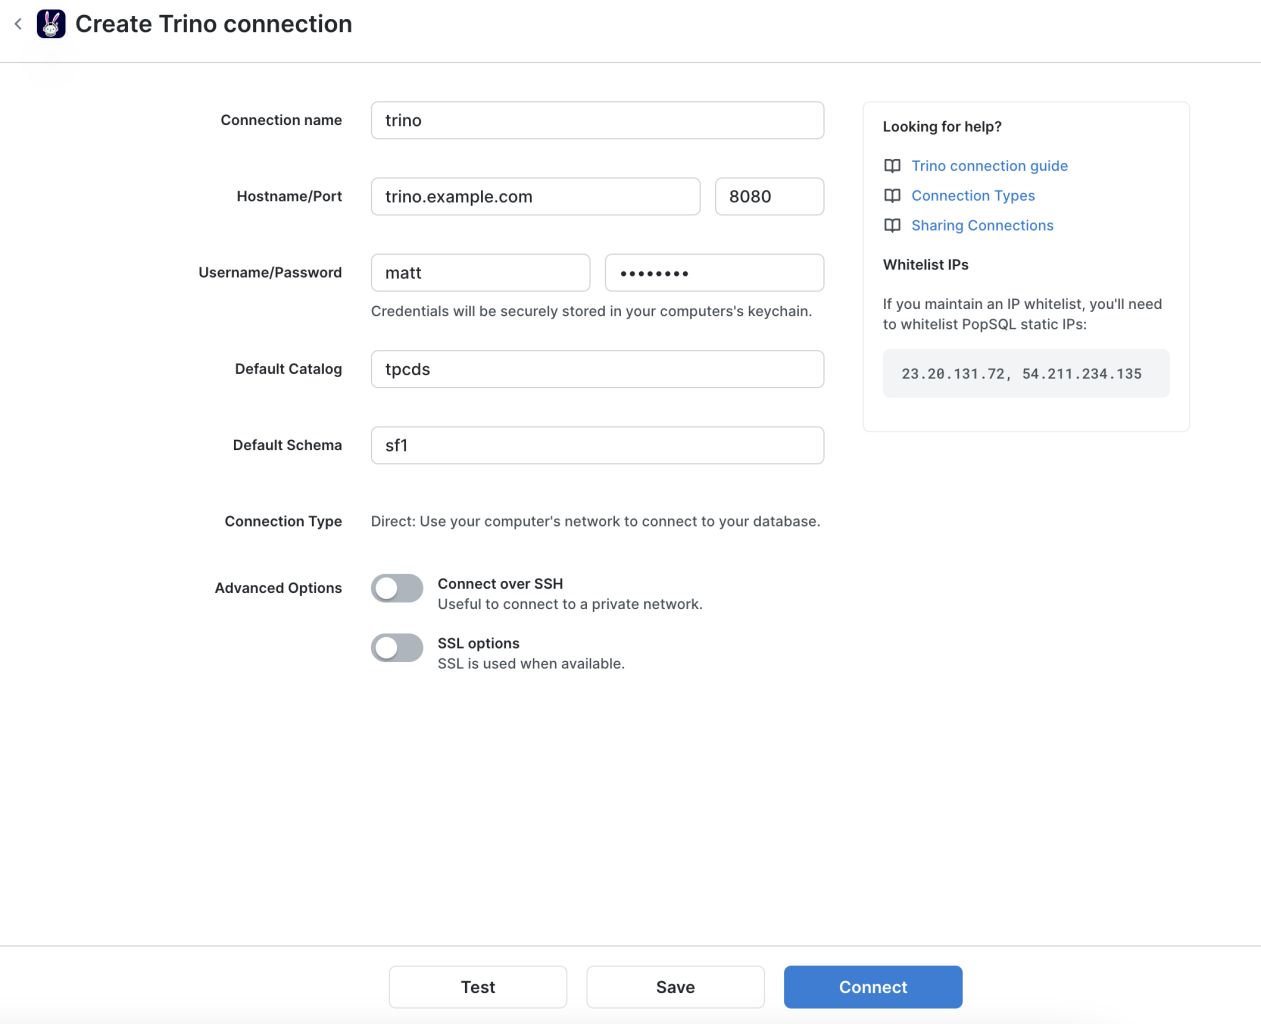 Screenshot of the trino connection form